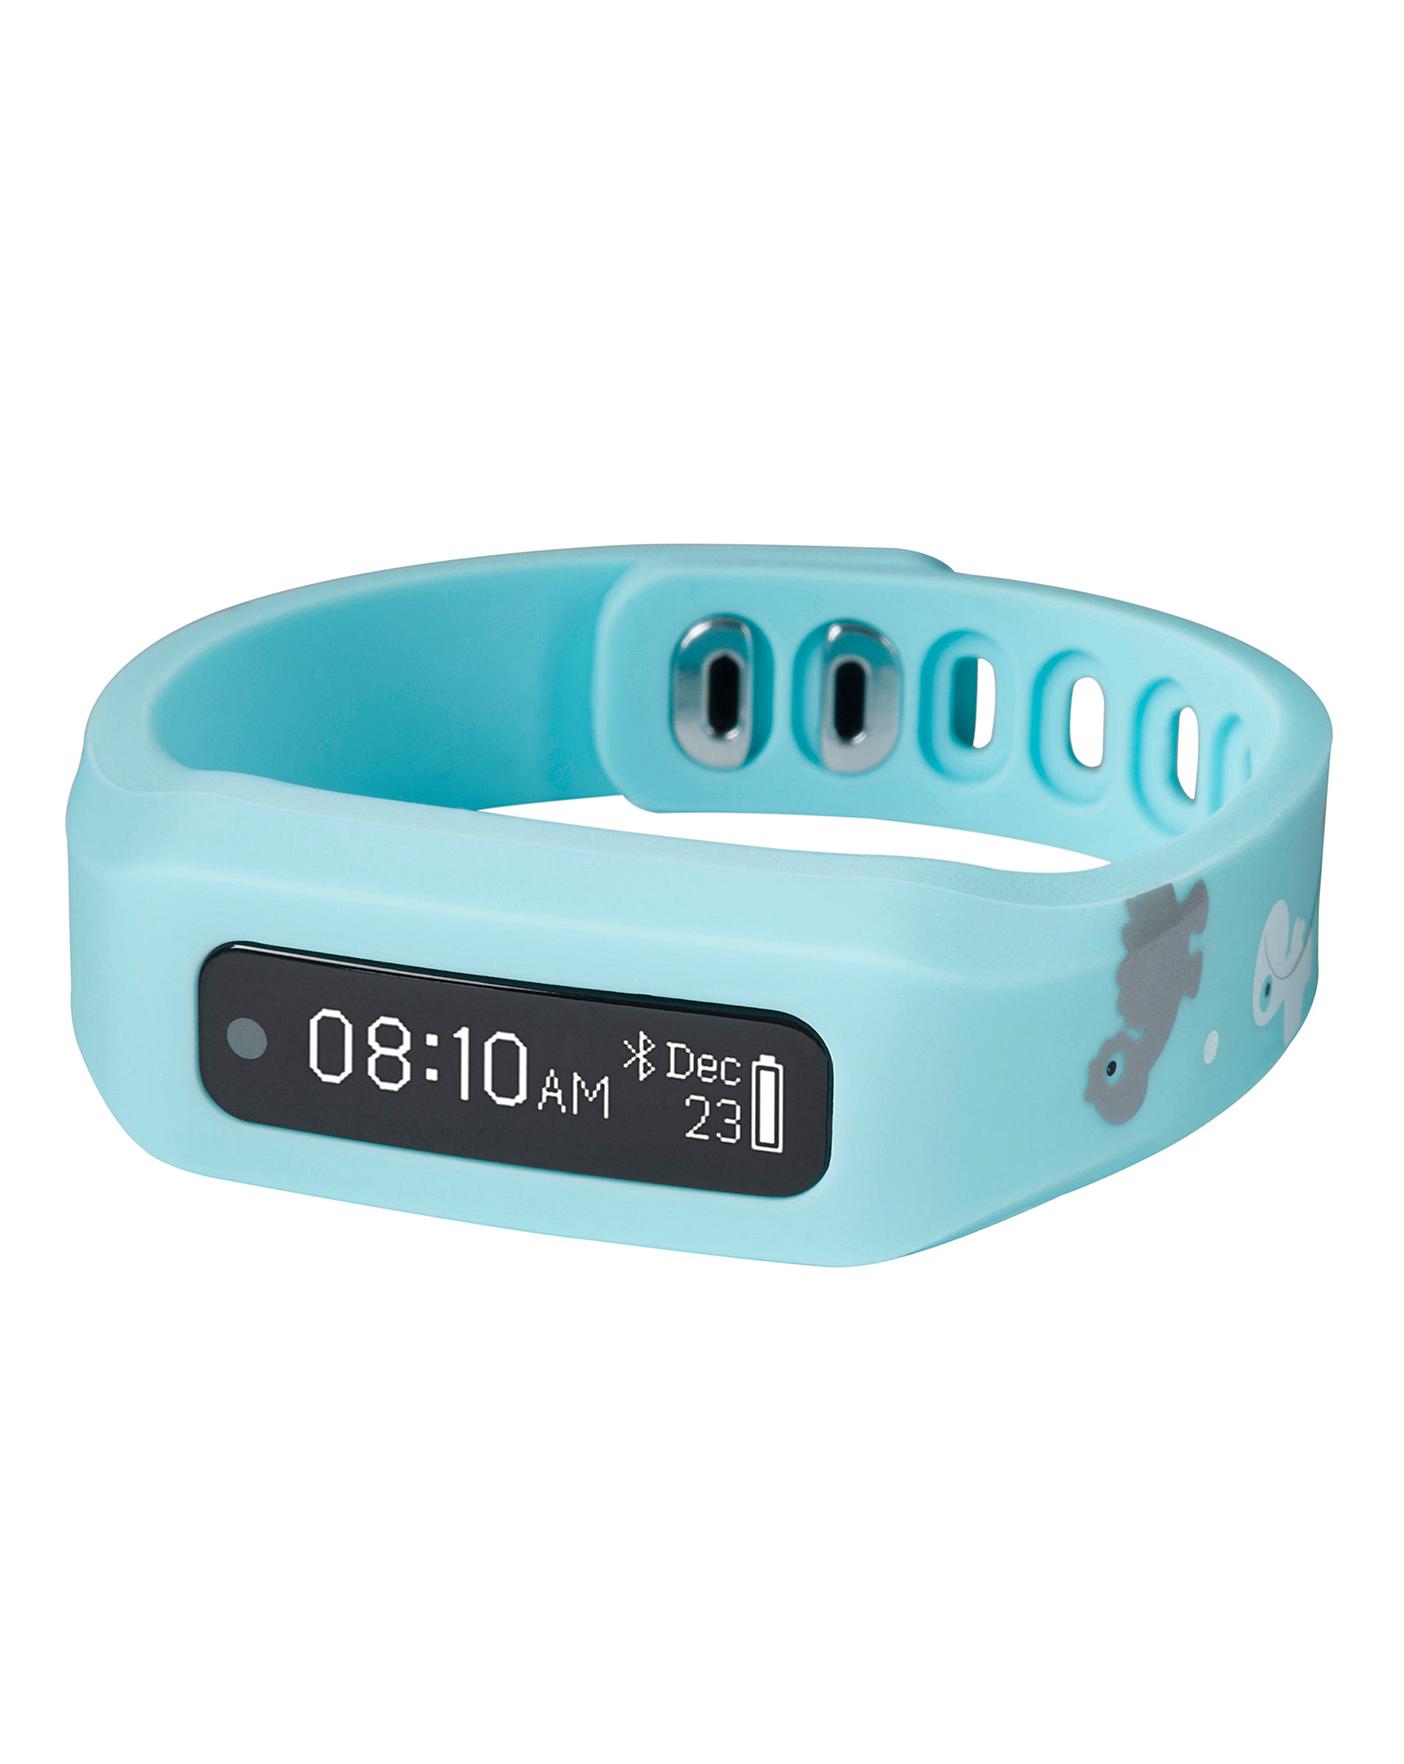 how to change the time on a nuband fitbit